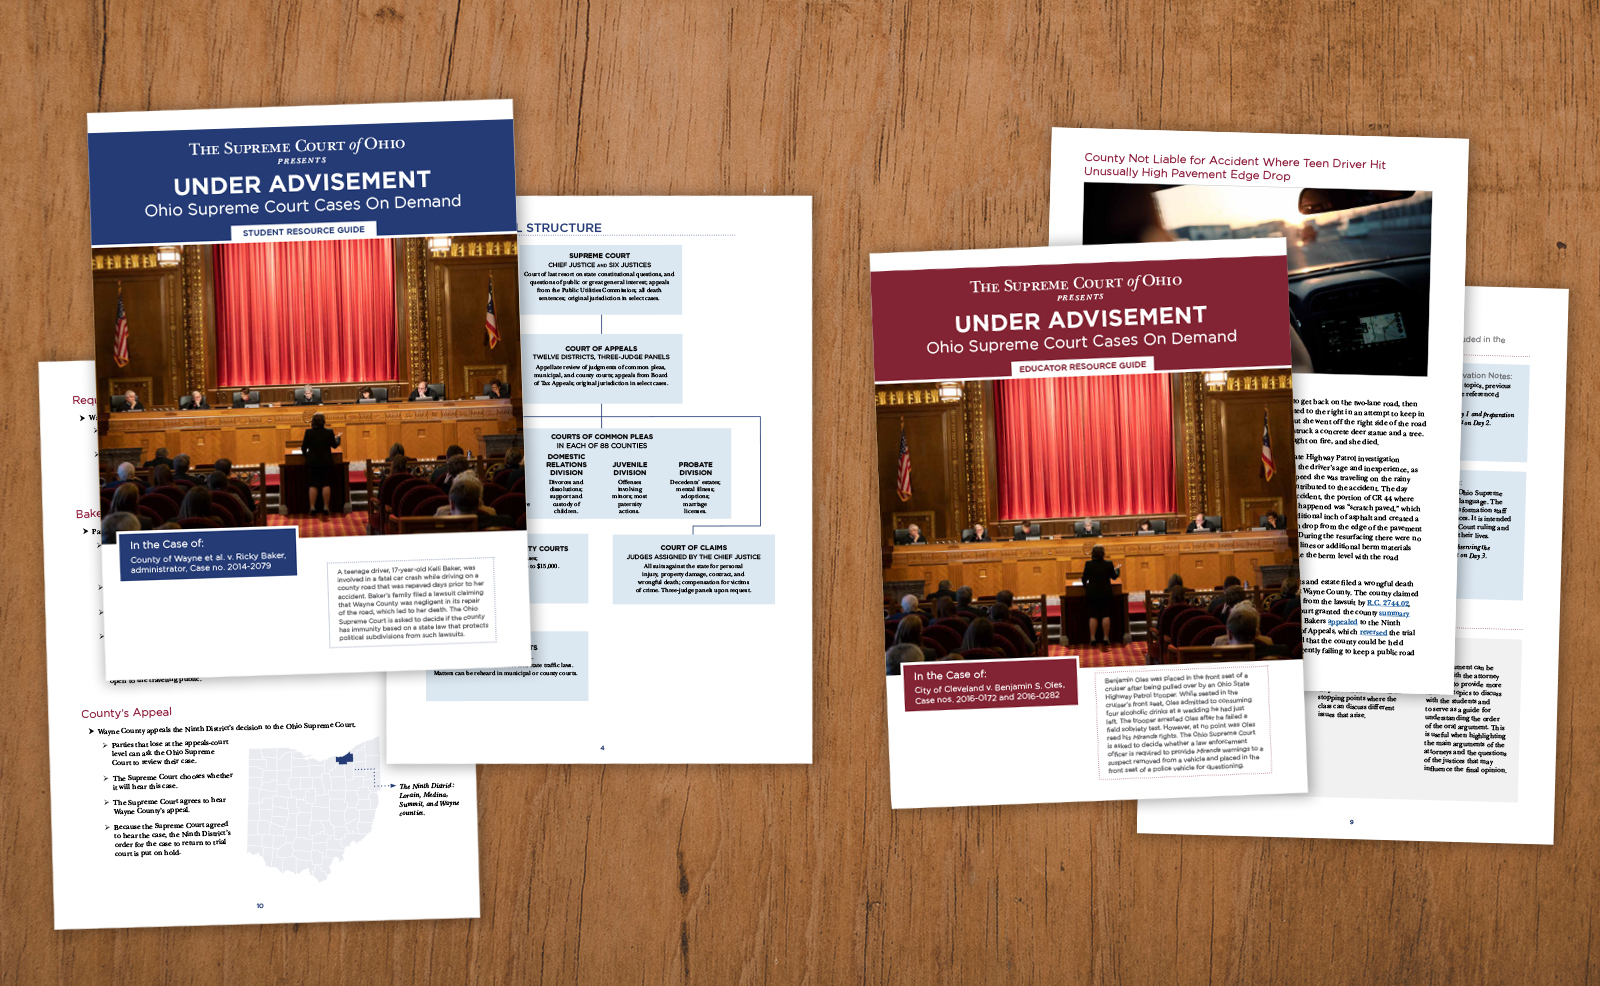 Image of several pages from the 'Under Advisement' lesson plans